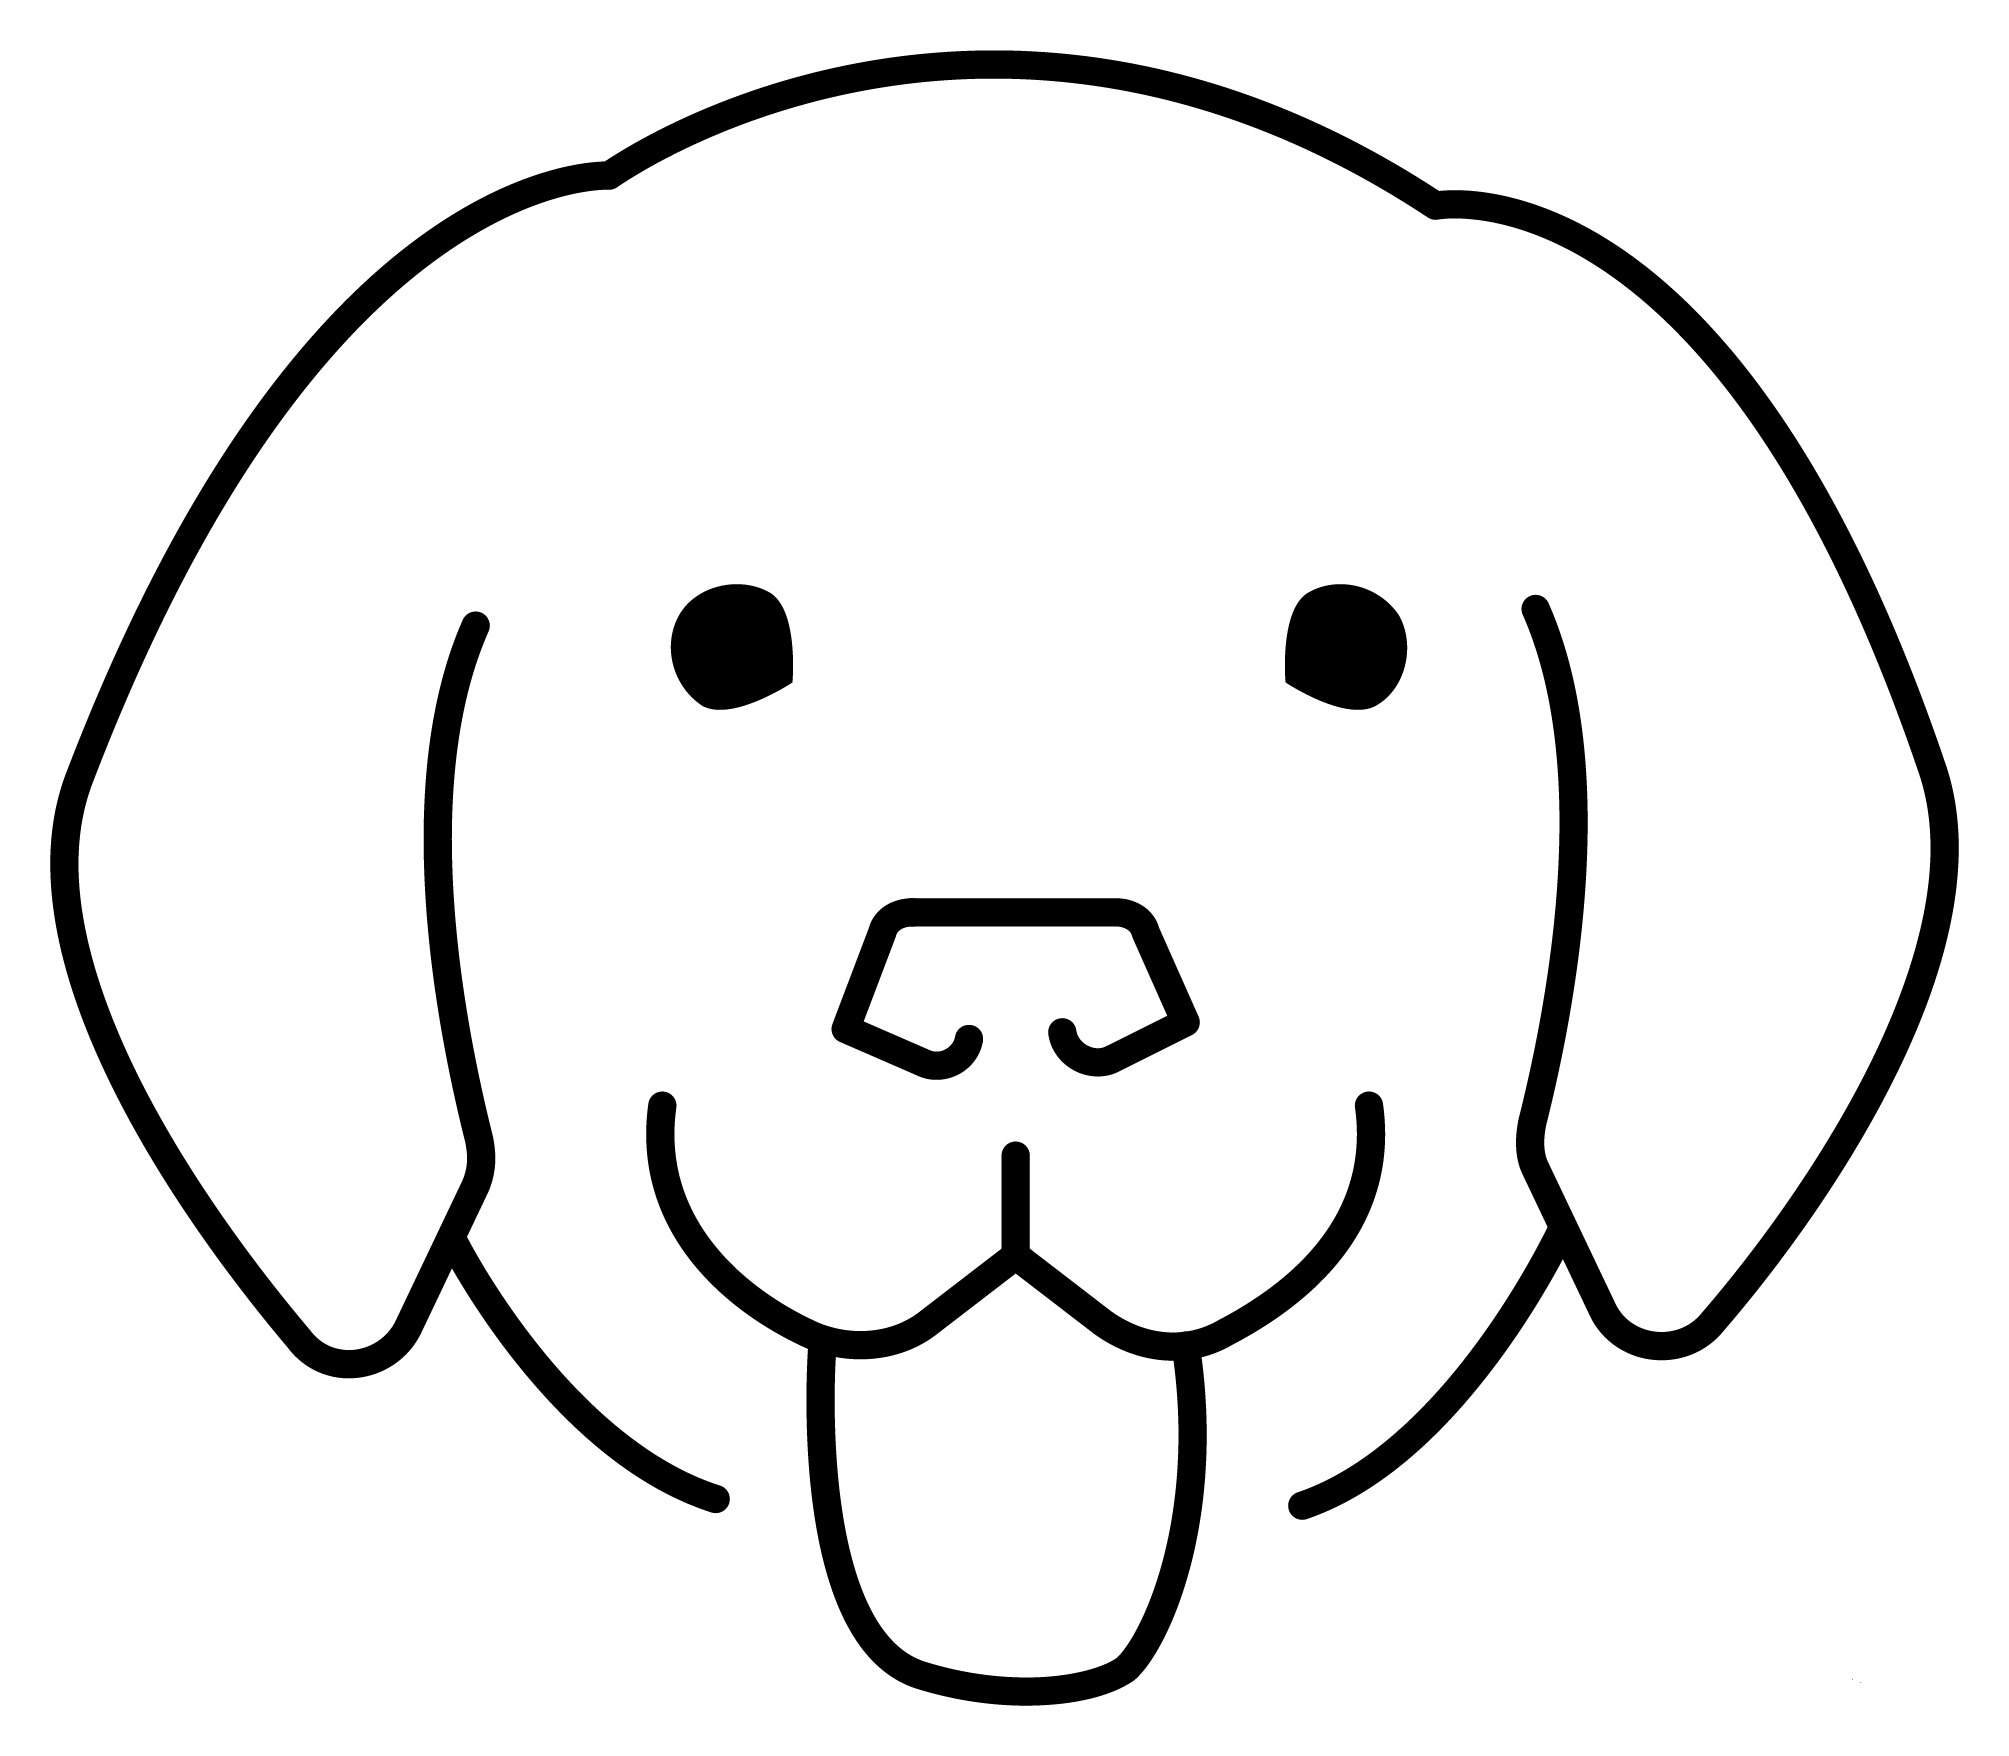 Dog Face Emoji coloring page - ColouringPages